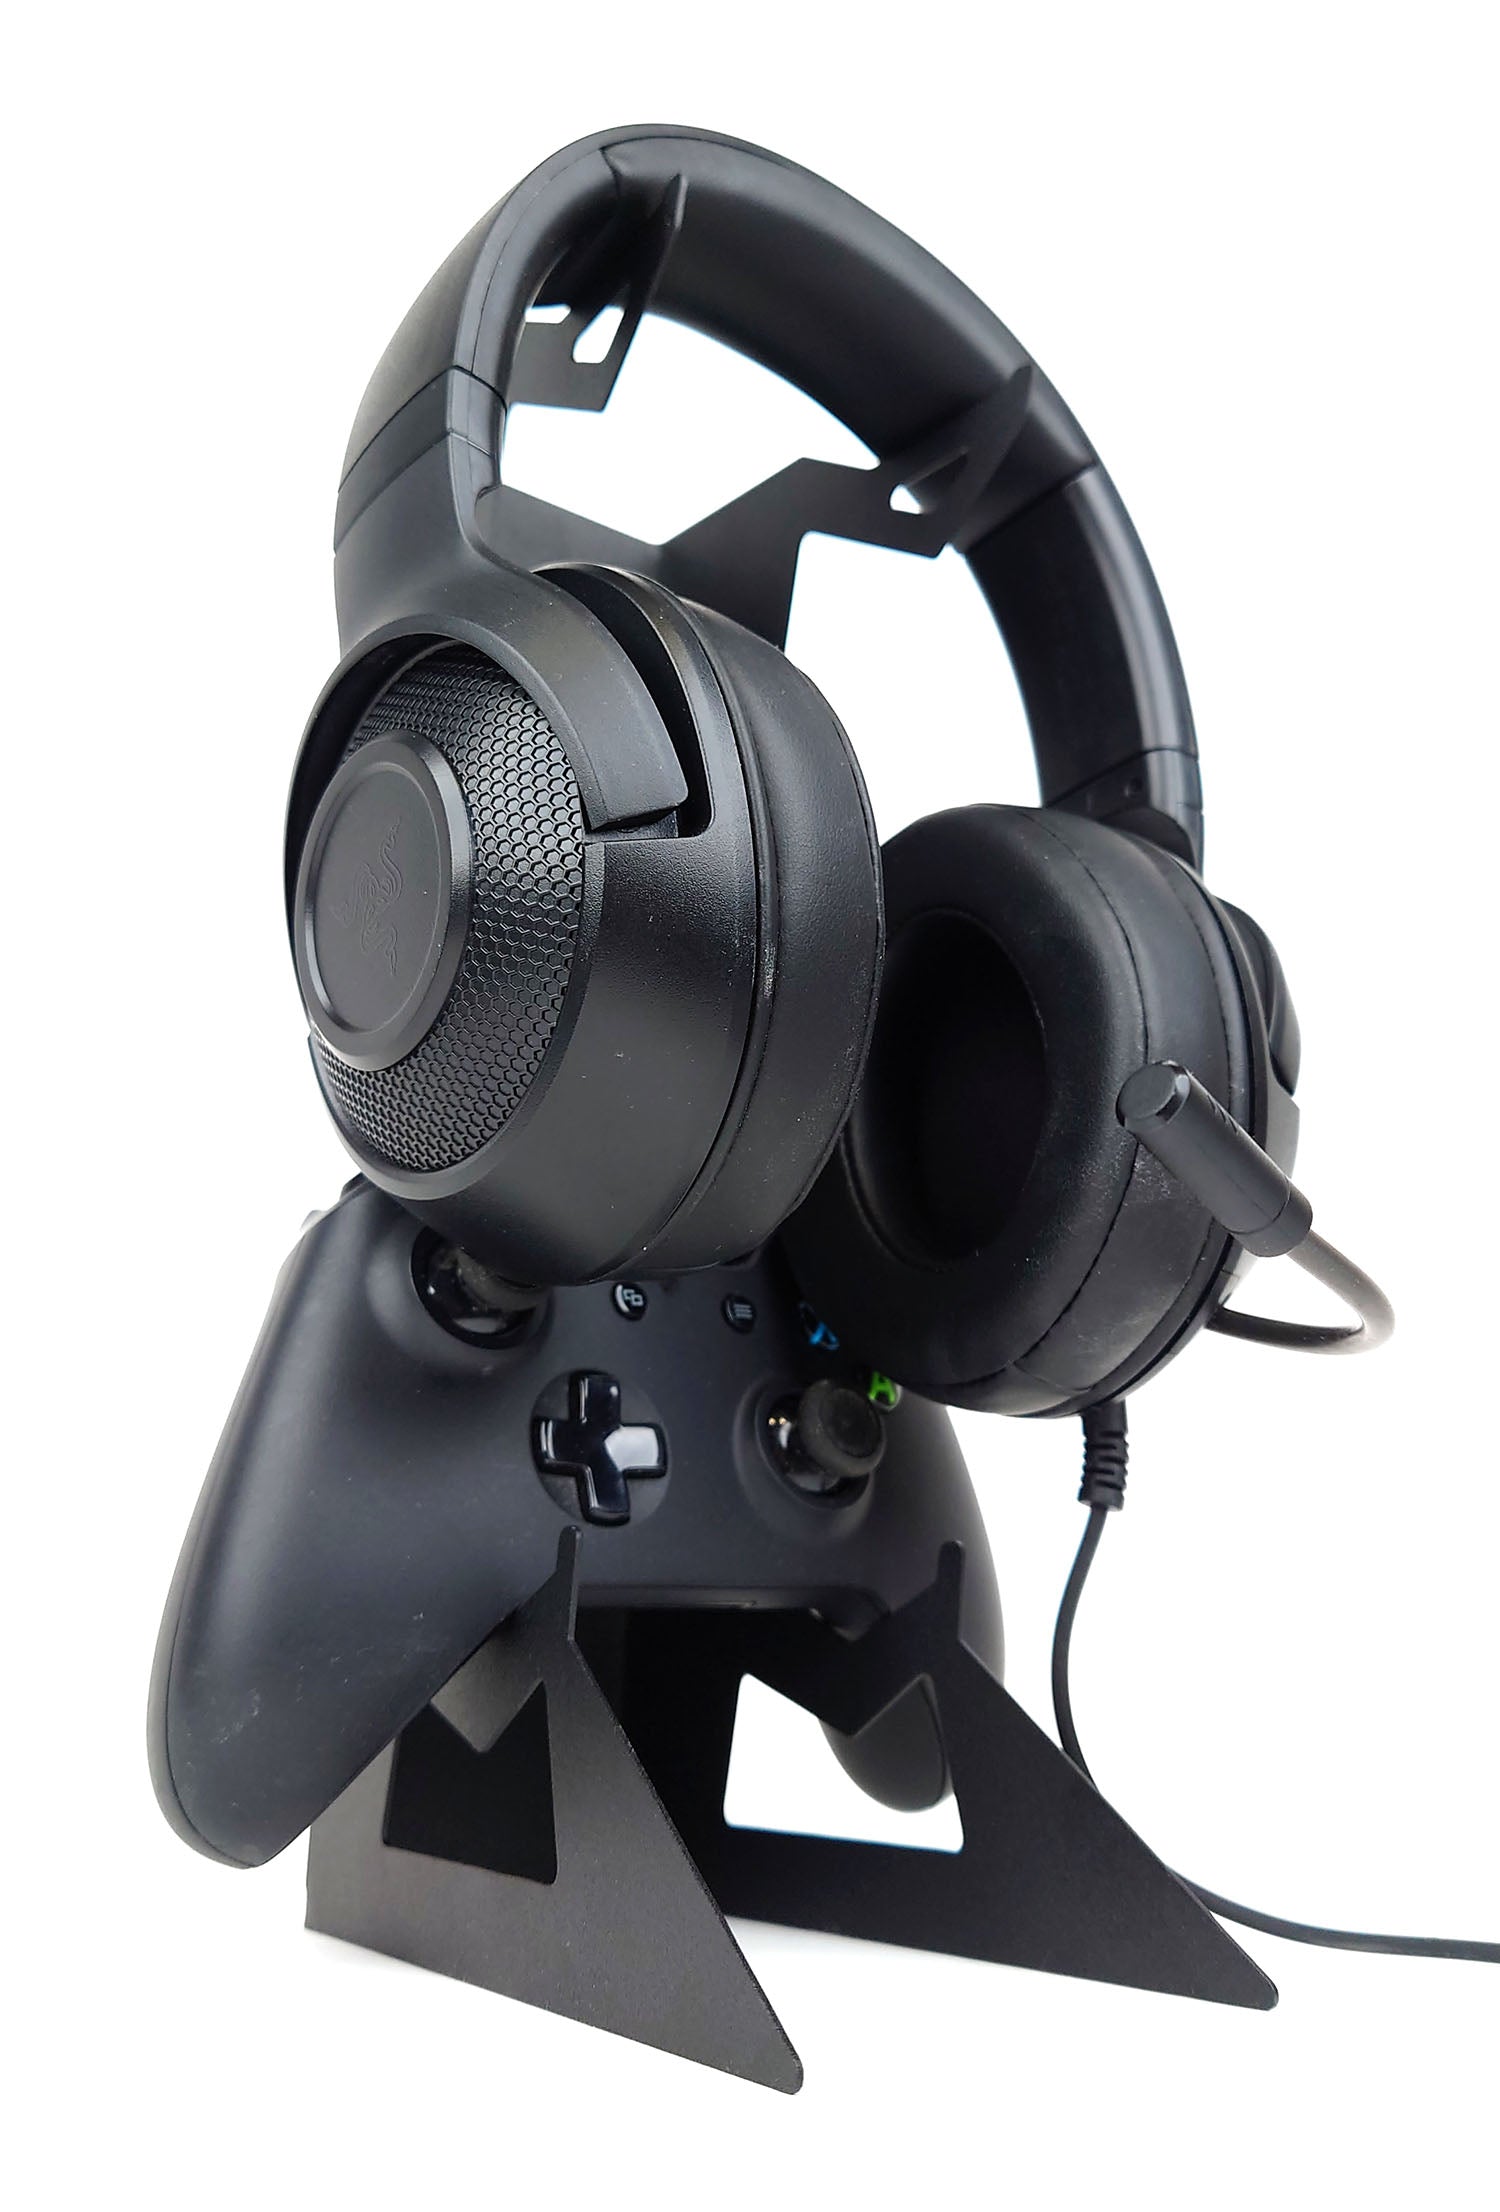 Headset and Controller Mounted on GameShieldz Tower